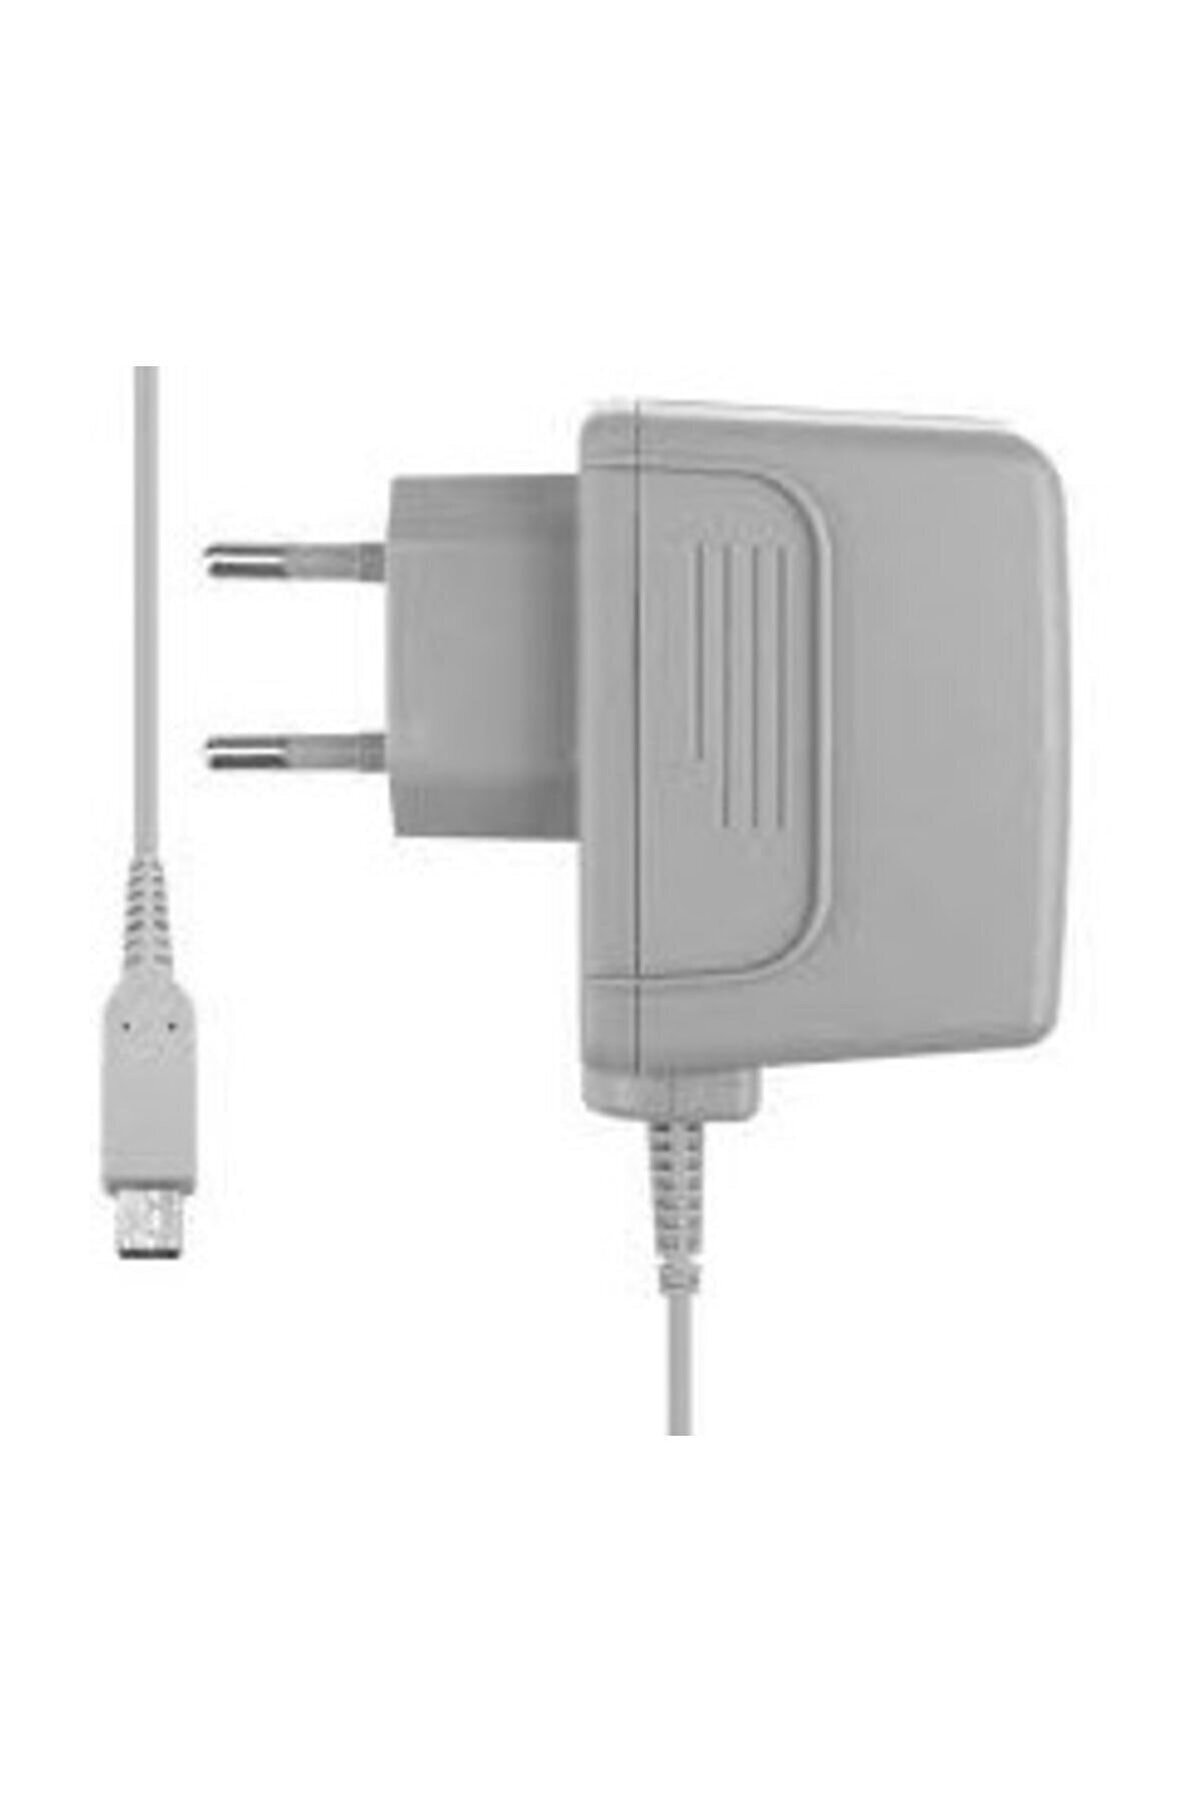 Nintendo For New 3ds ll 3ds AC ADAPTER 6922011920228